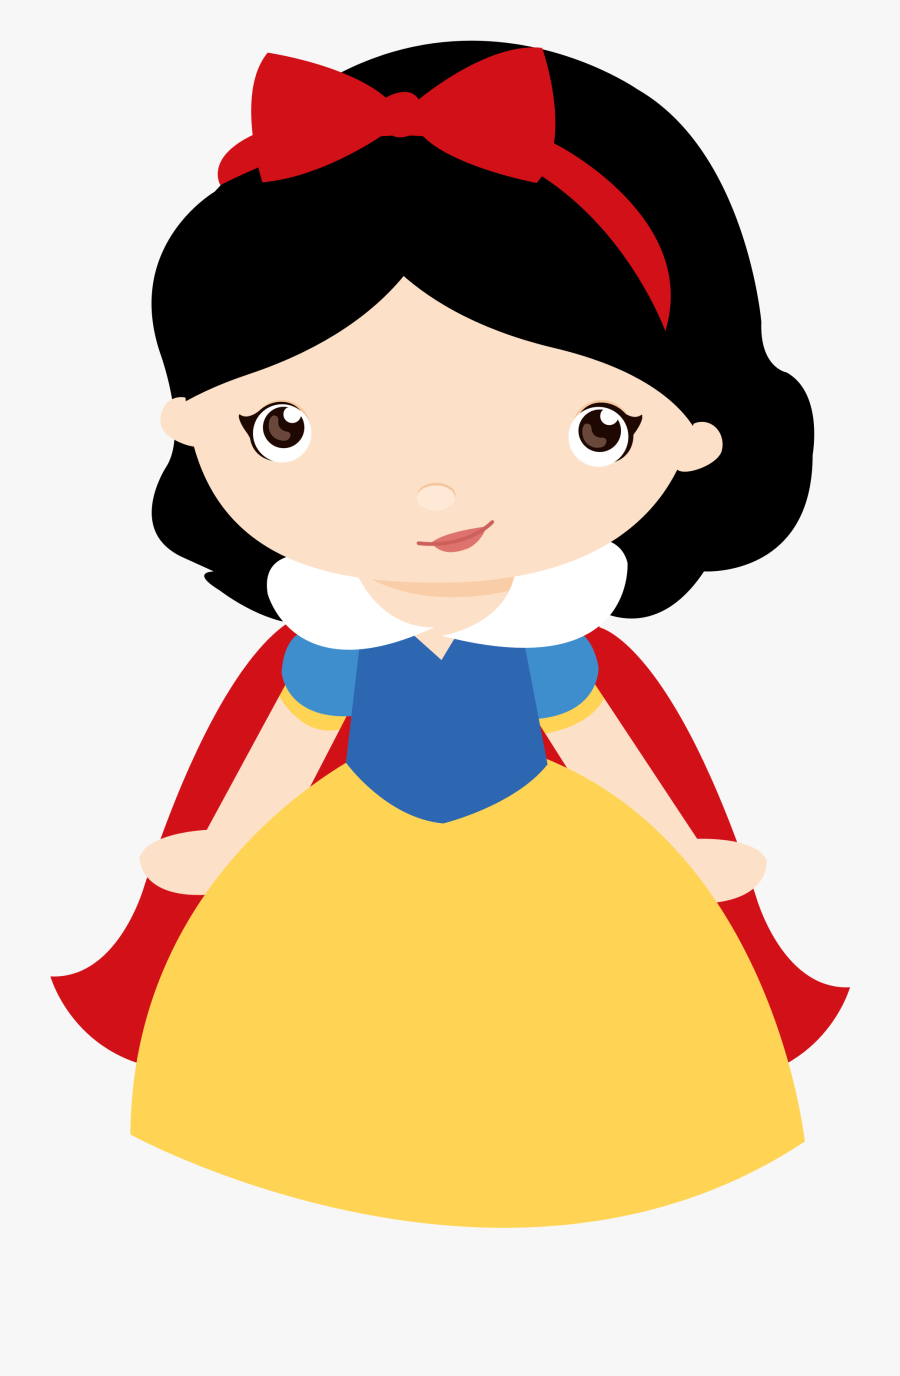 Snow White Baby Clip Art - Baby Snow White Clipart, Transparent Clipart